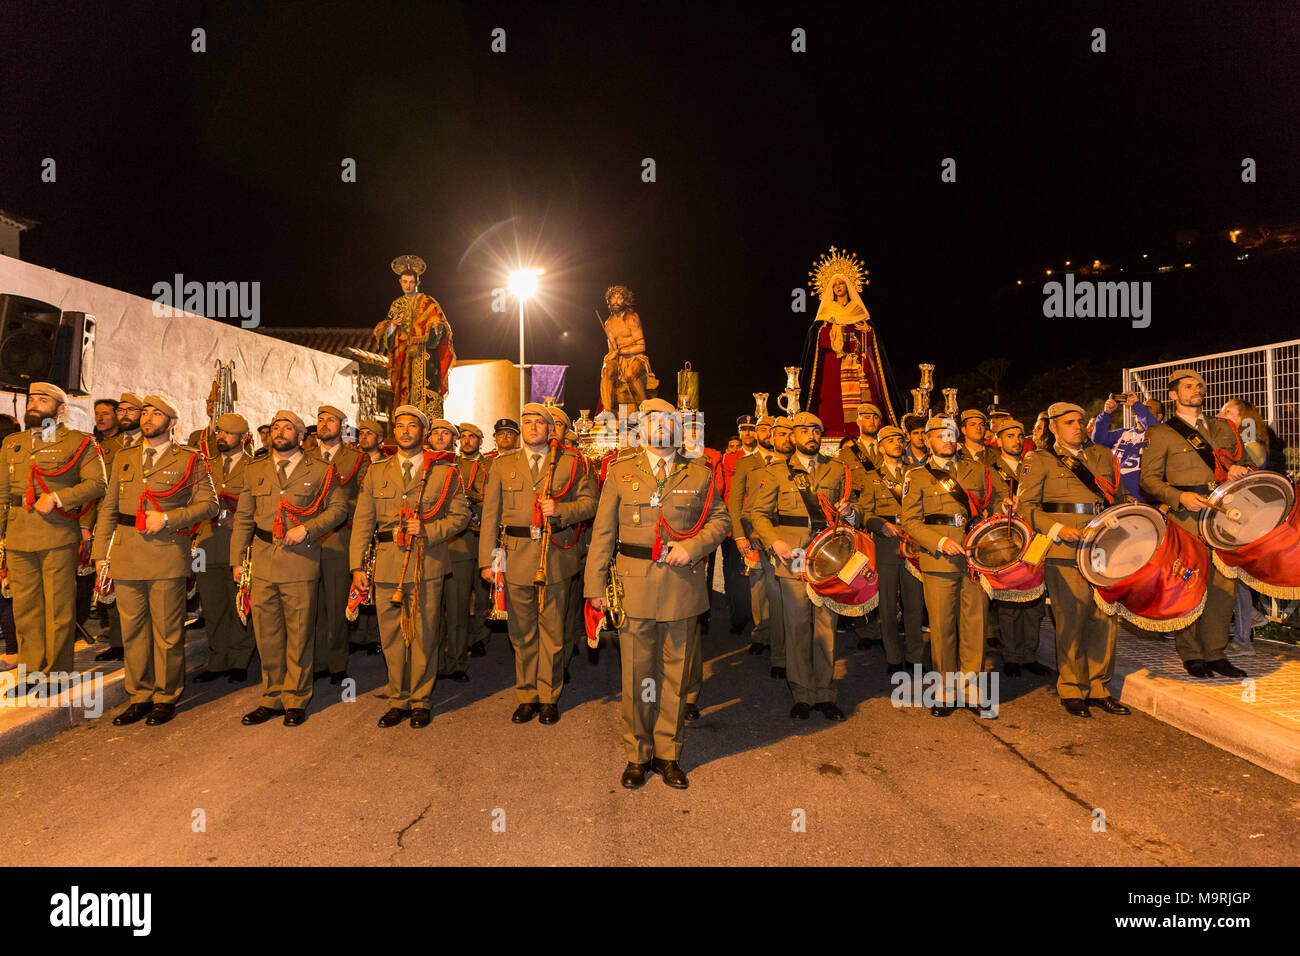 Members of the local Fire Service, in dress uniform, taking part in a religious procession on Monday of holy week, with lifesize statues of Jesus Chri Stock Photo